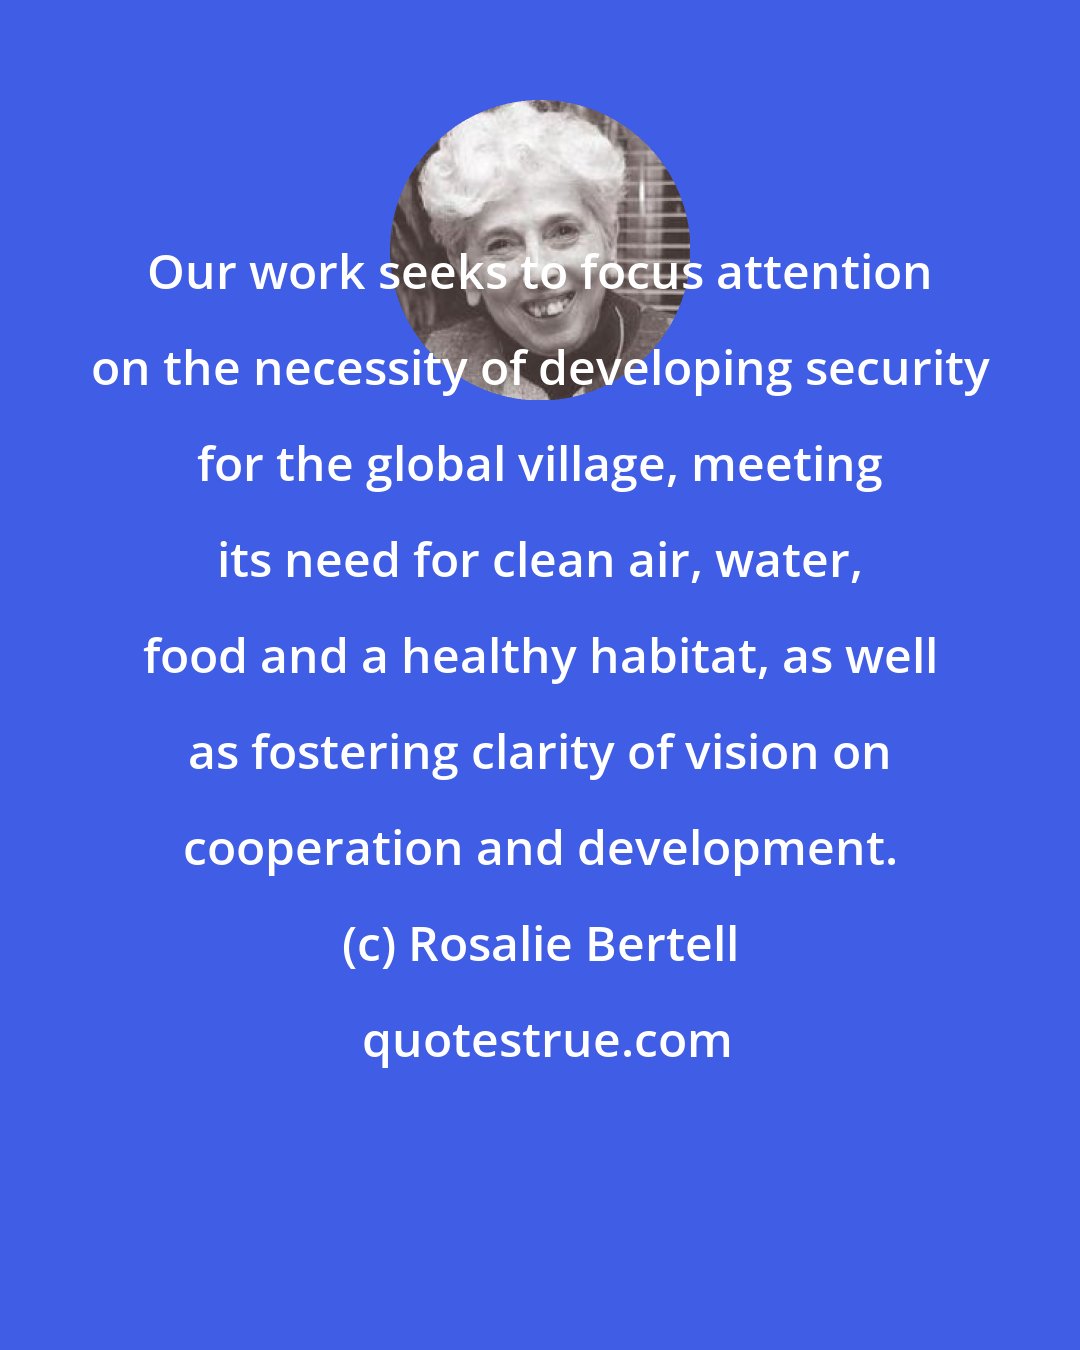 Rosalie Bertell: Our work seeks to focus attention on the necessity of developing security for the global village, meeting its need for clean air, water, food and a healthy habitat, as well as fostering clarity of vision on cooperation and development.